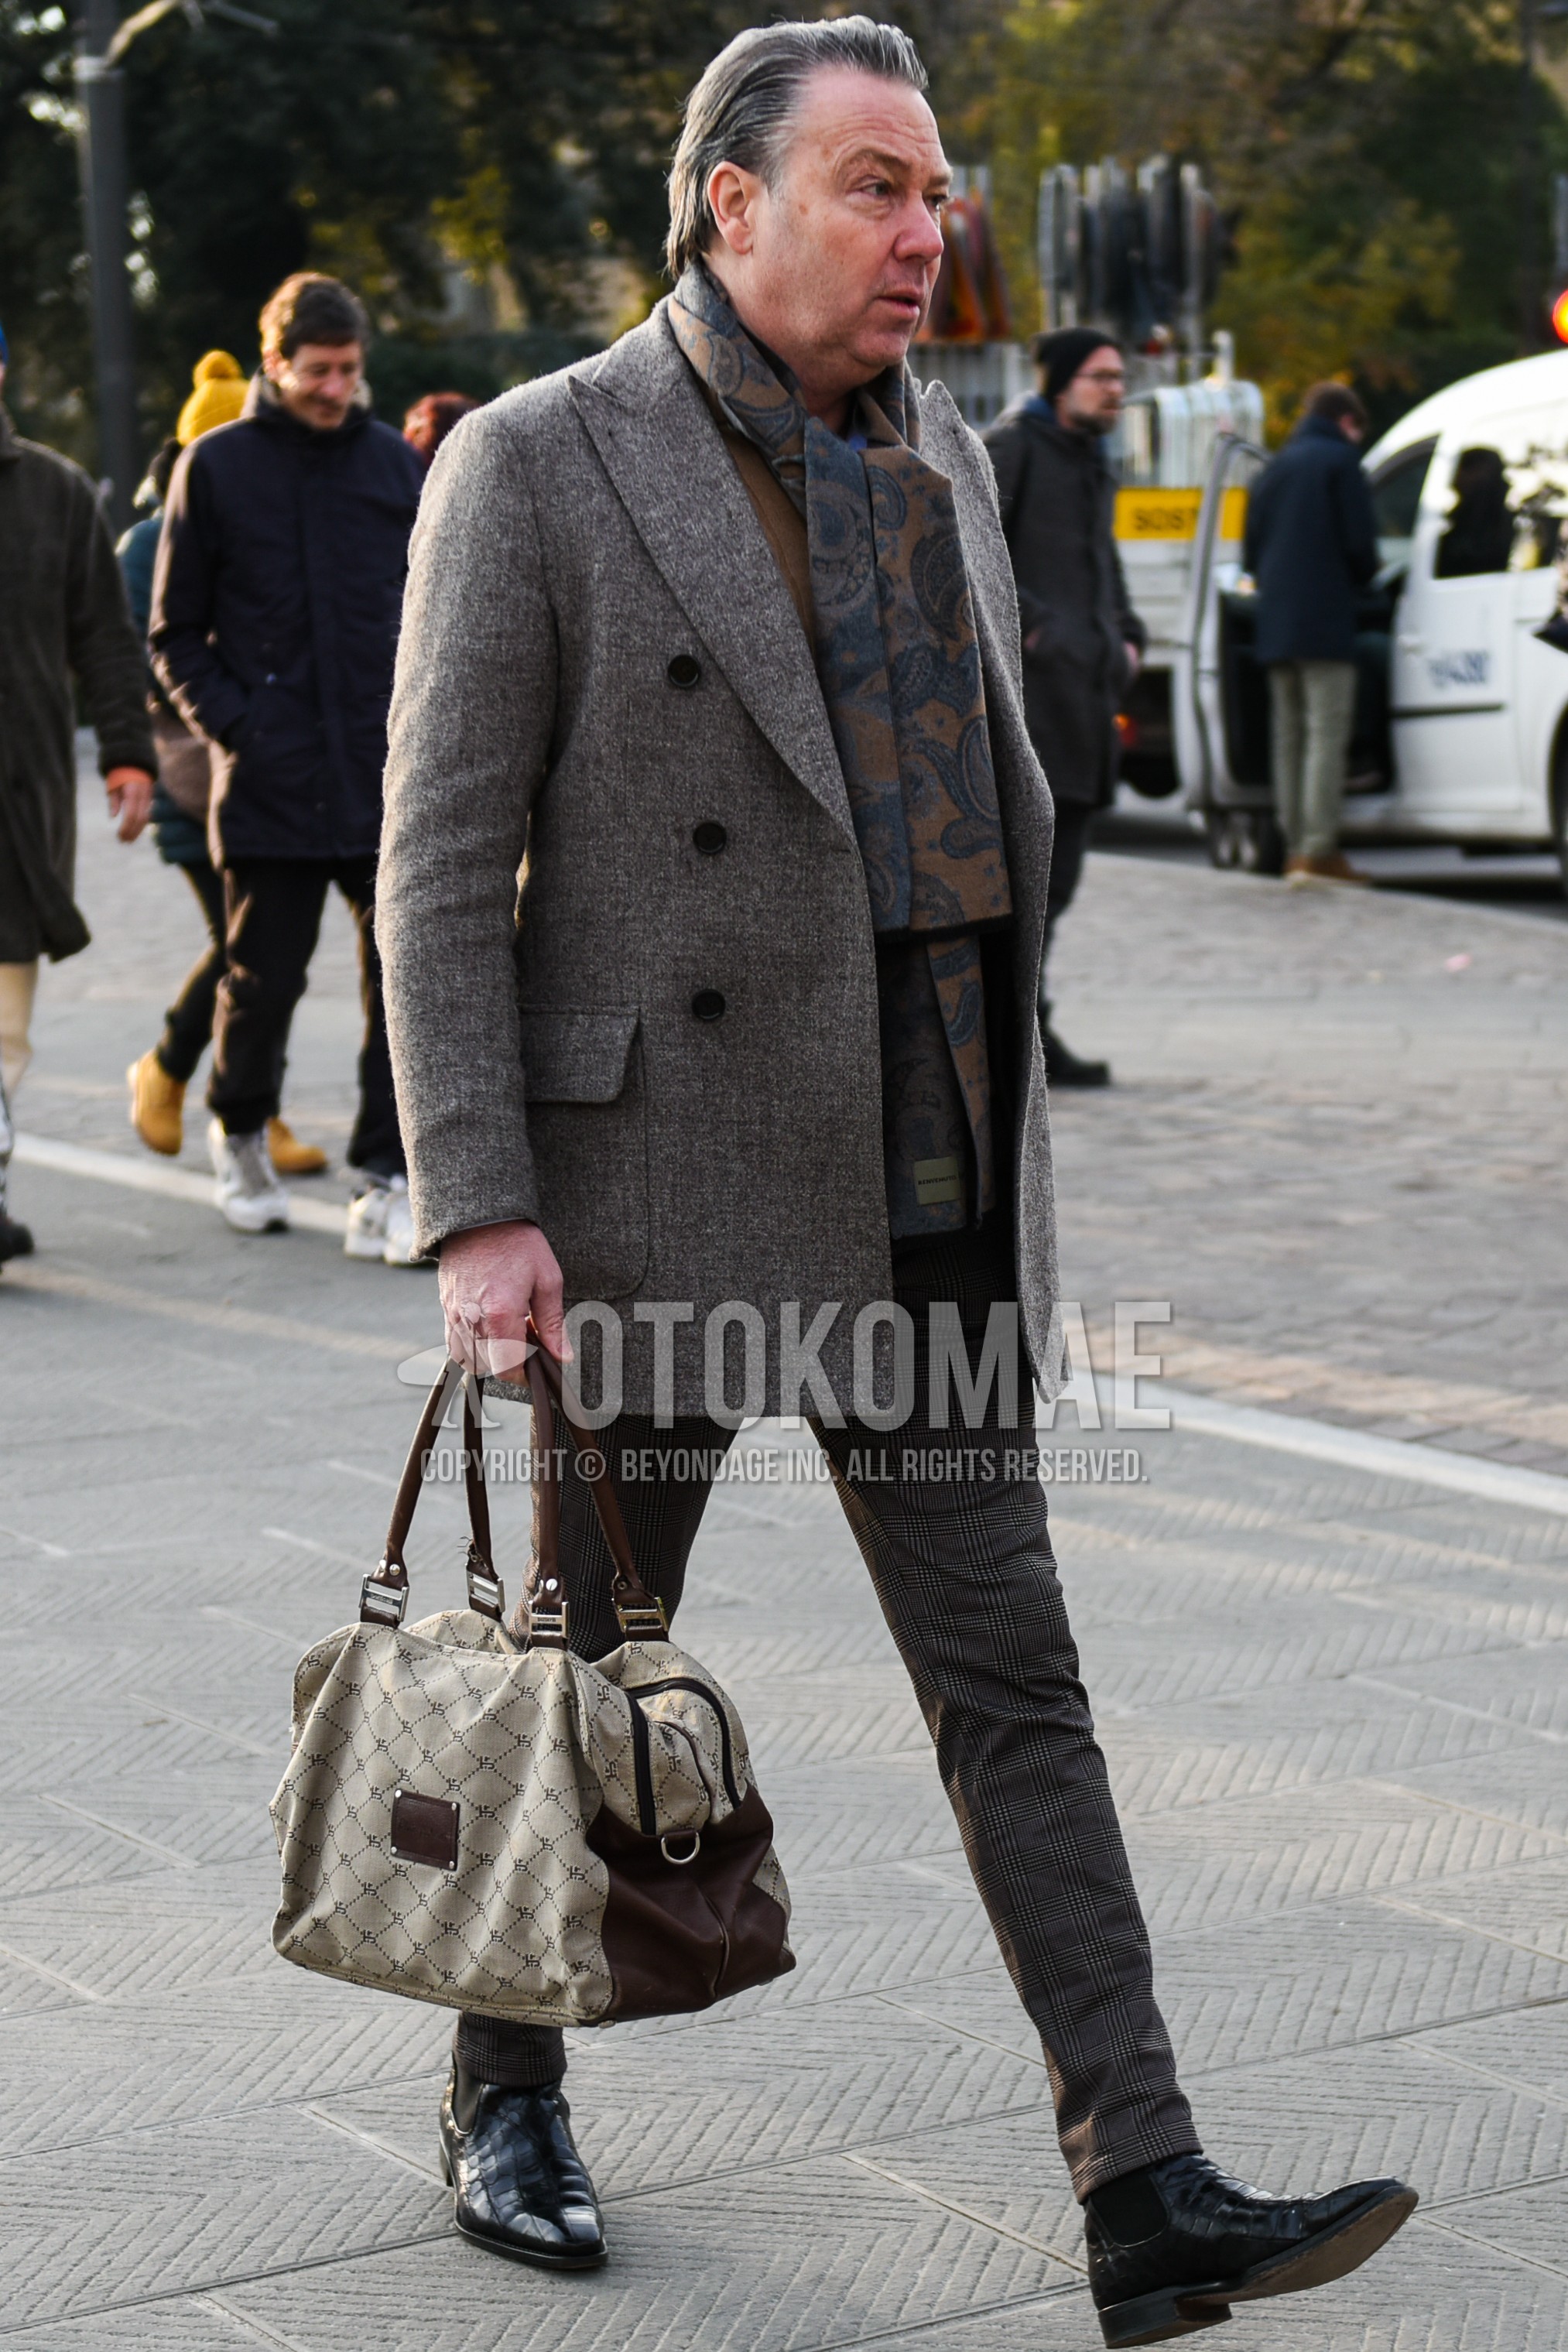 Men's autumn winter outfit with beige green scarf scarf, gray plain chester coat, beige plain sweater, gray check slacks, gray check ankle pants, black side-gore boots, beige bag briefcase/handbag.